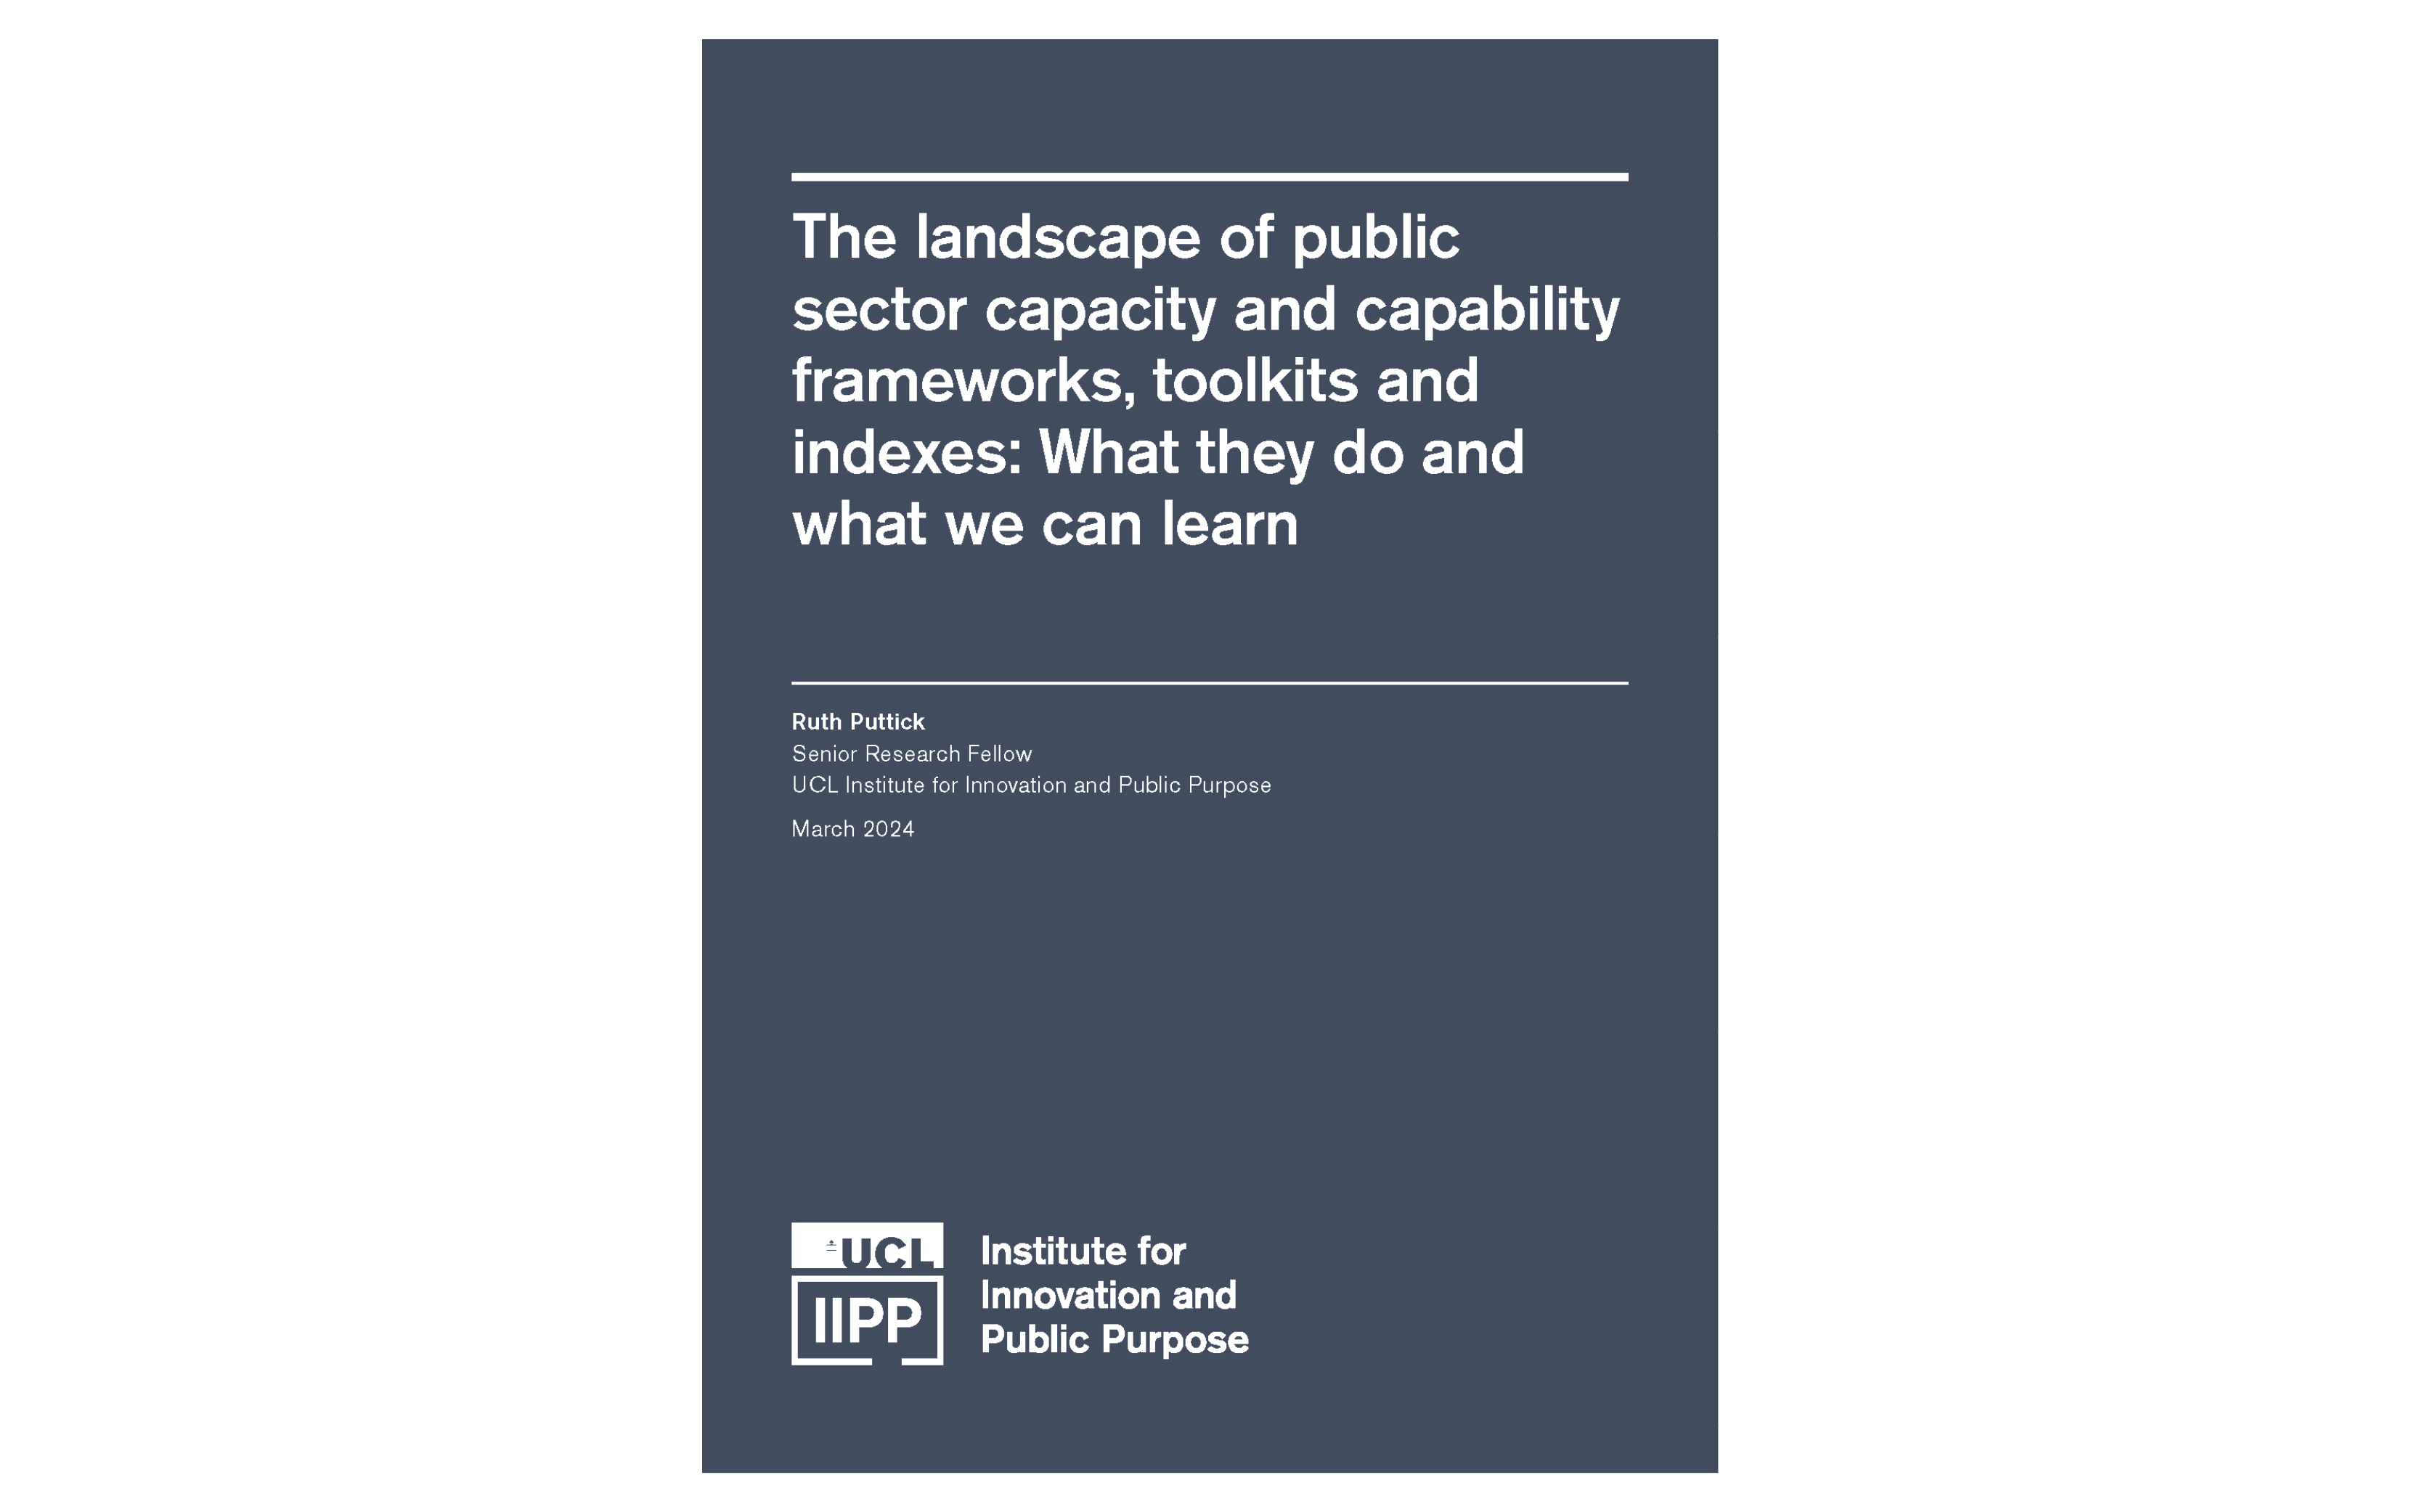 The landscape of public sector capacity and capability frameworks, toolkits and indexes: What they do and what we can learn